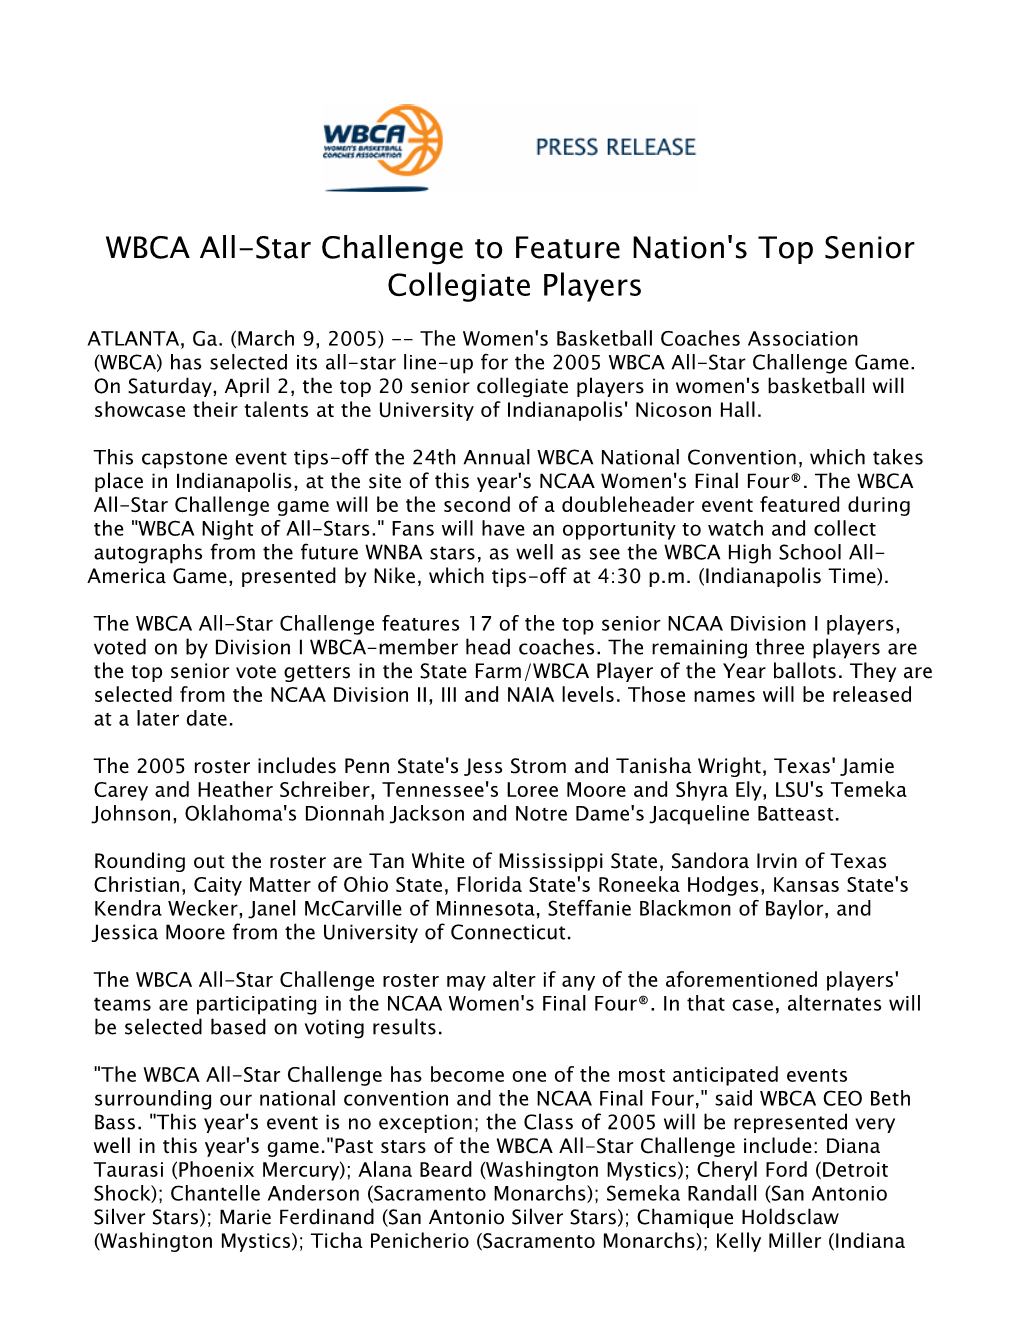 WBCA All-Star Challenge to Feature Nation's Top Senior Collegiate Players 2004-05 030905